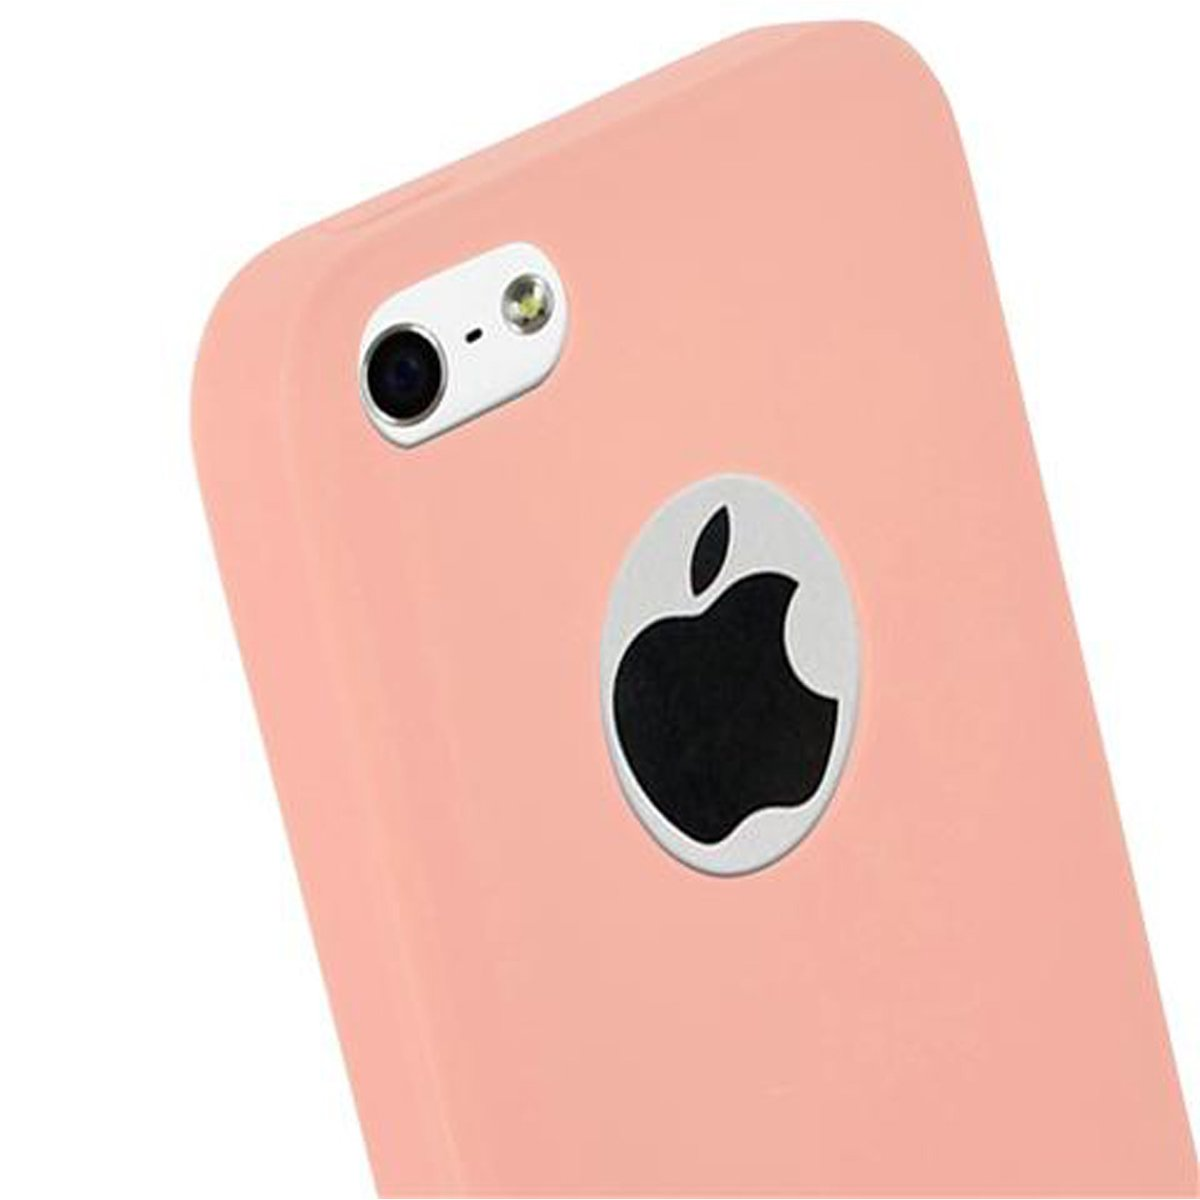 im / CADORABO SE Candy CANDY 2016, 5 Style, ROSA TPU / Backcover, iPhone 5S Hülle Apple,